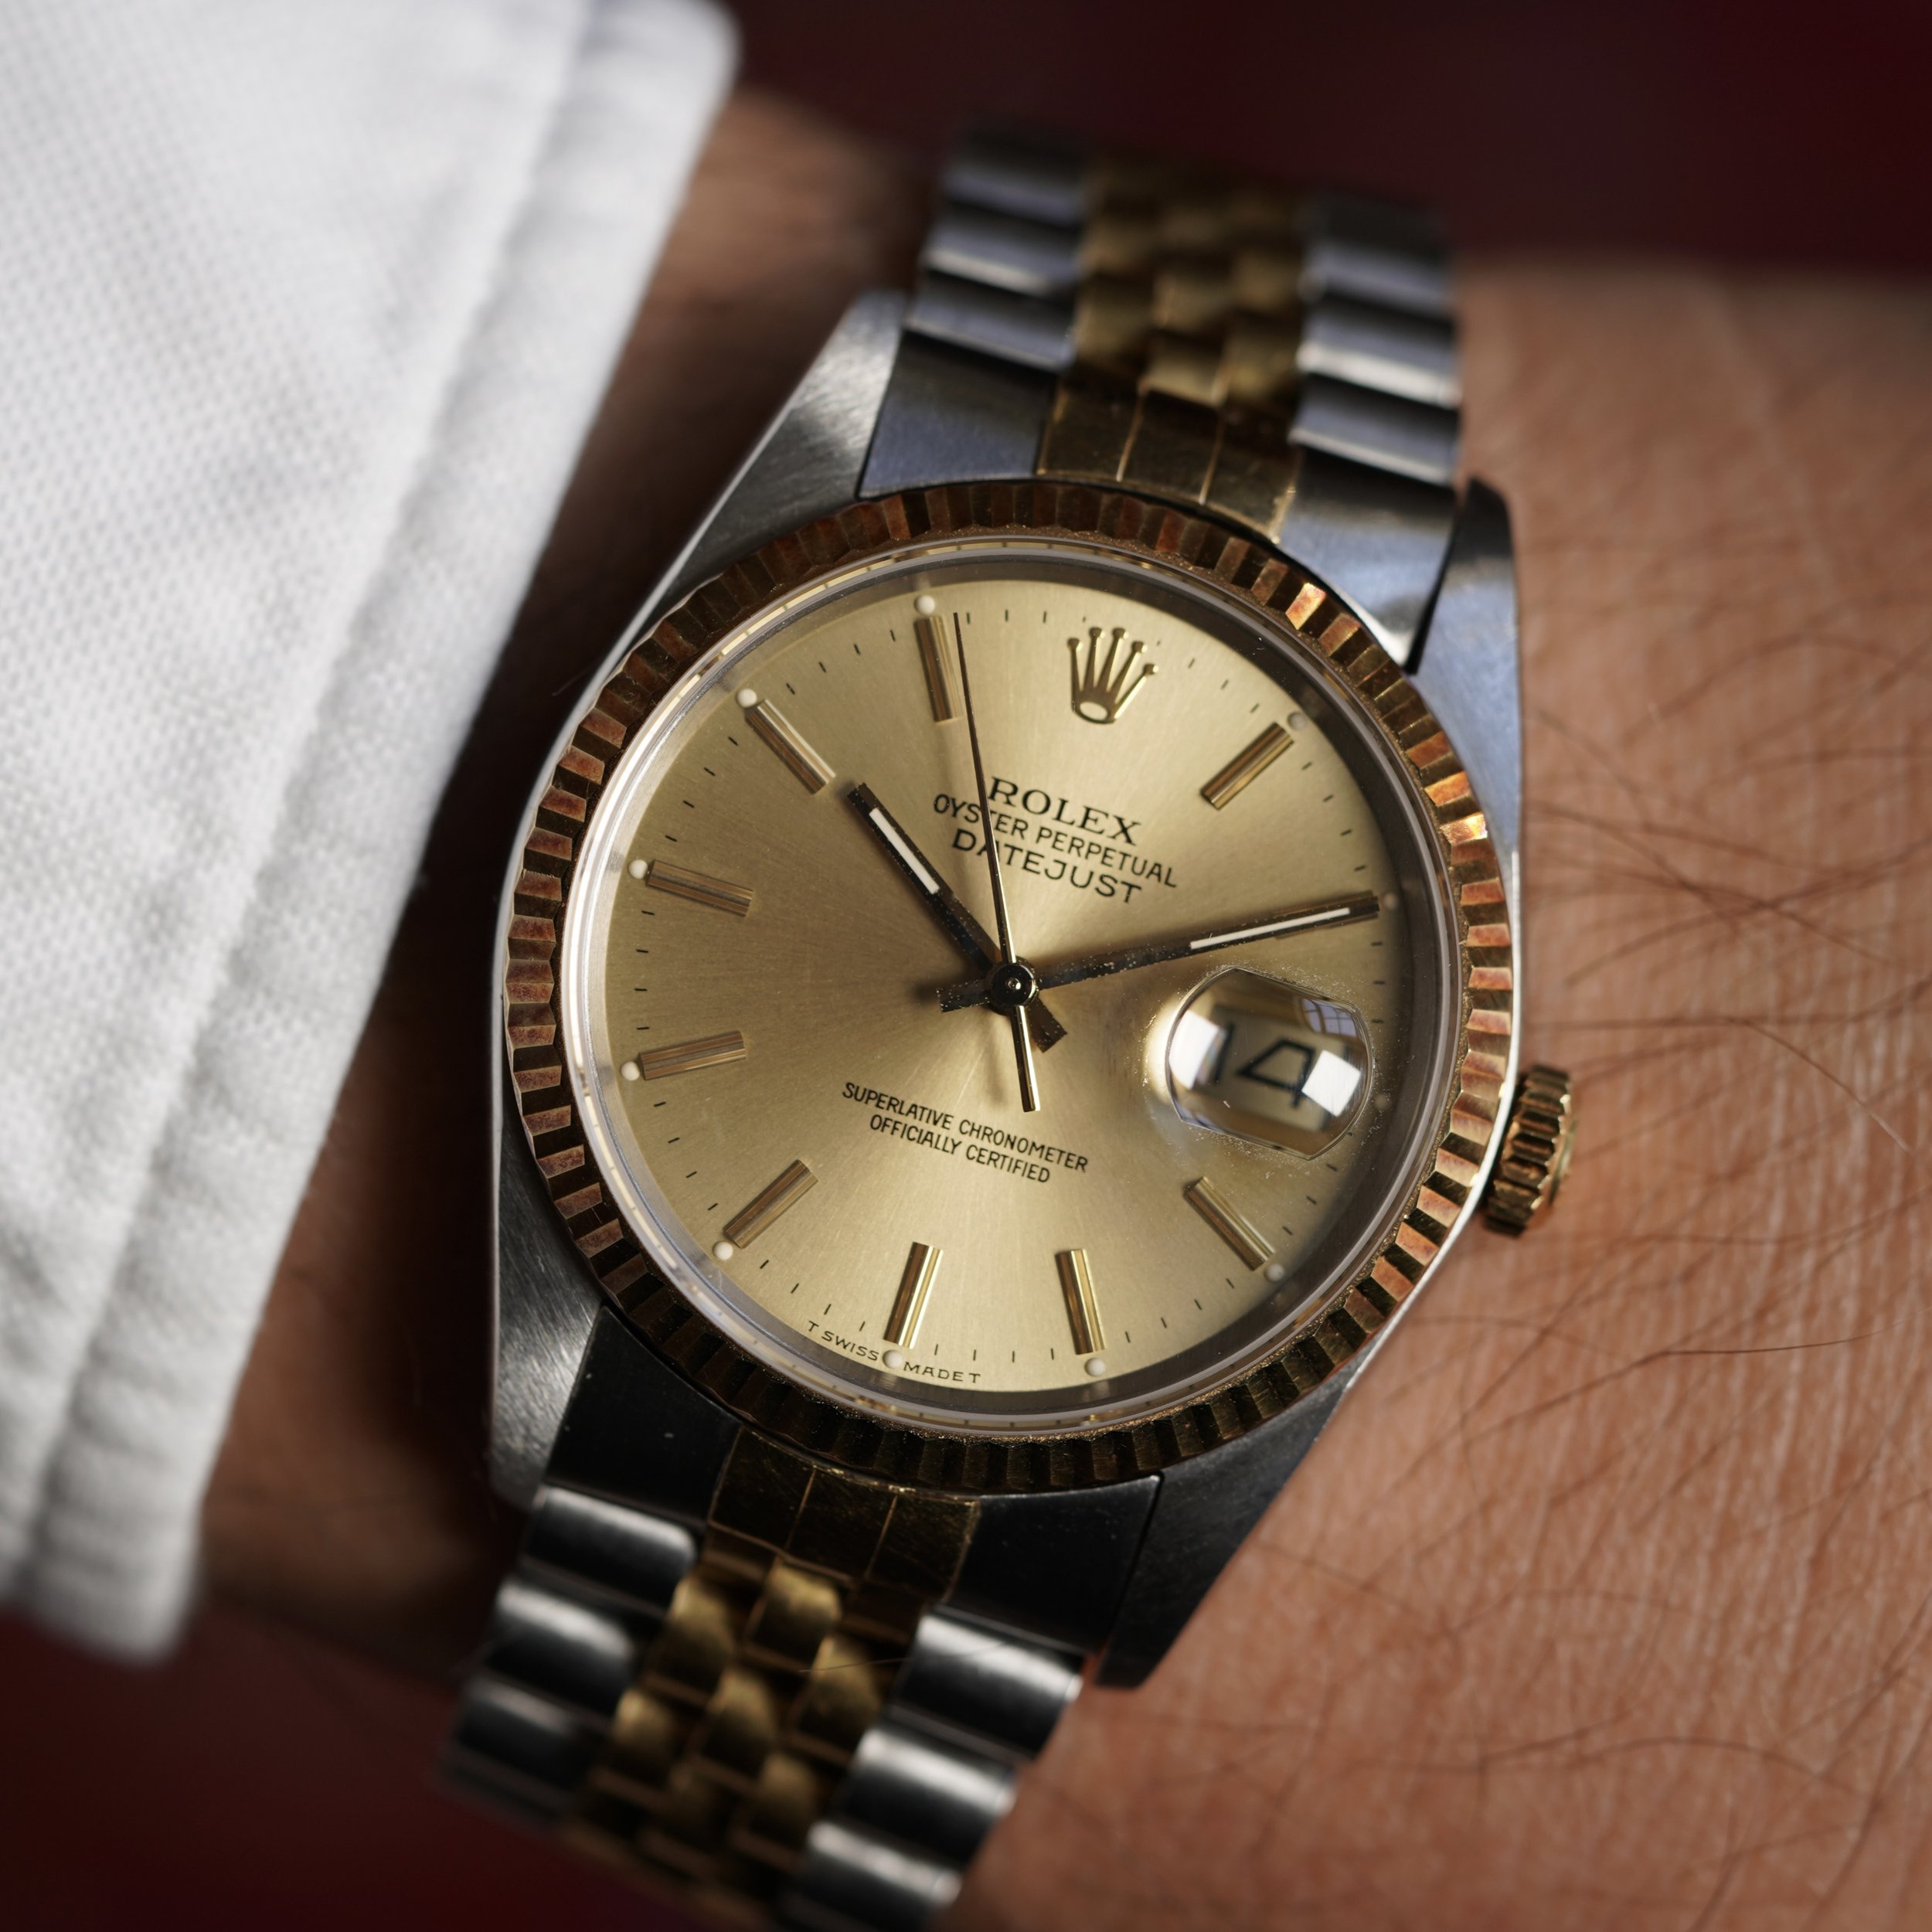 Rolex Two-Tone Datejust Reference 16233 Unpolished